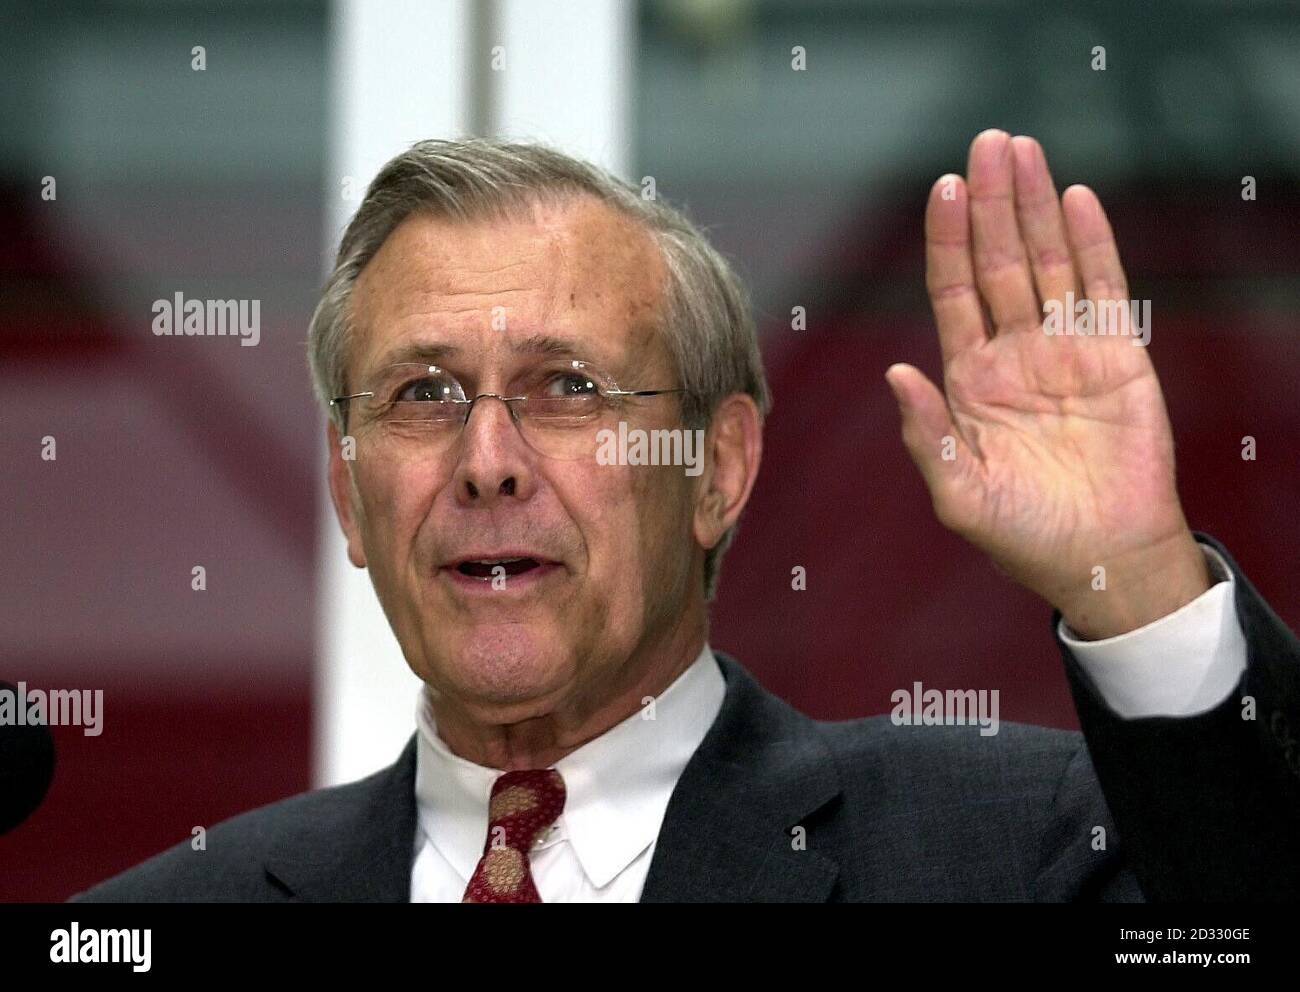 U.S. Defense Secretary Donald Rumsfeld speaks at a news conference with Britain's Secretary of State for Defence Geoff Hoon (not in picture) at London's Heathrow Airport.  Mr Rumsfeld was in Britain for talks with Prime Minister Tony Blair.  * .. during the last stop on a trip that has taken him to the Persian Gulf and Afghanistan.  07/05/04: US defence secretary Donald Rumsfeld, who has faced growing demands to resign over the abuse by of Iraqi prisoners by US soldiers. But President George Bush has said: 'He'll stay in my Cabinet'. Stock Photo